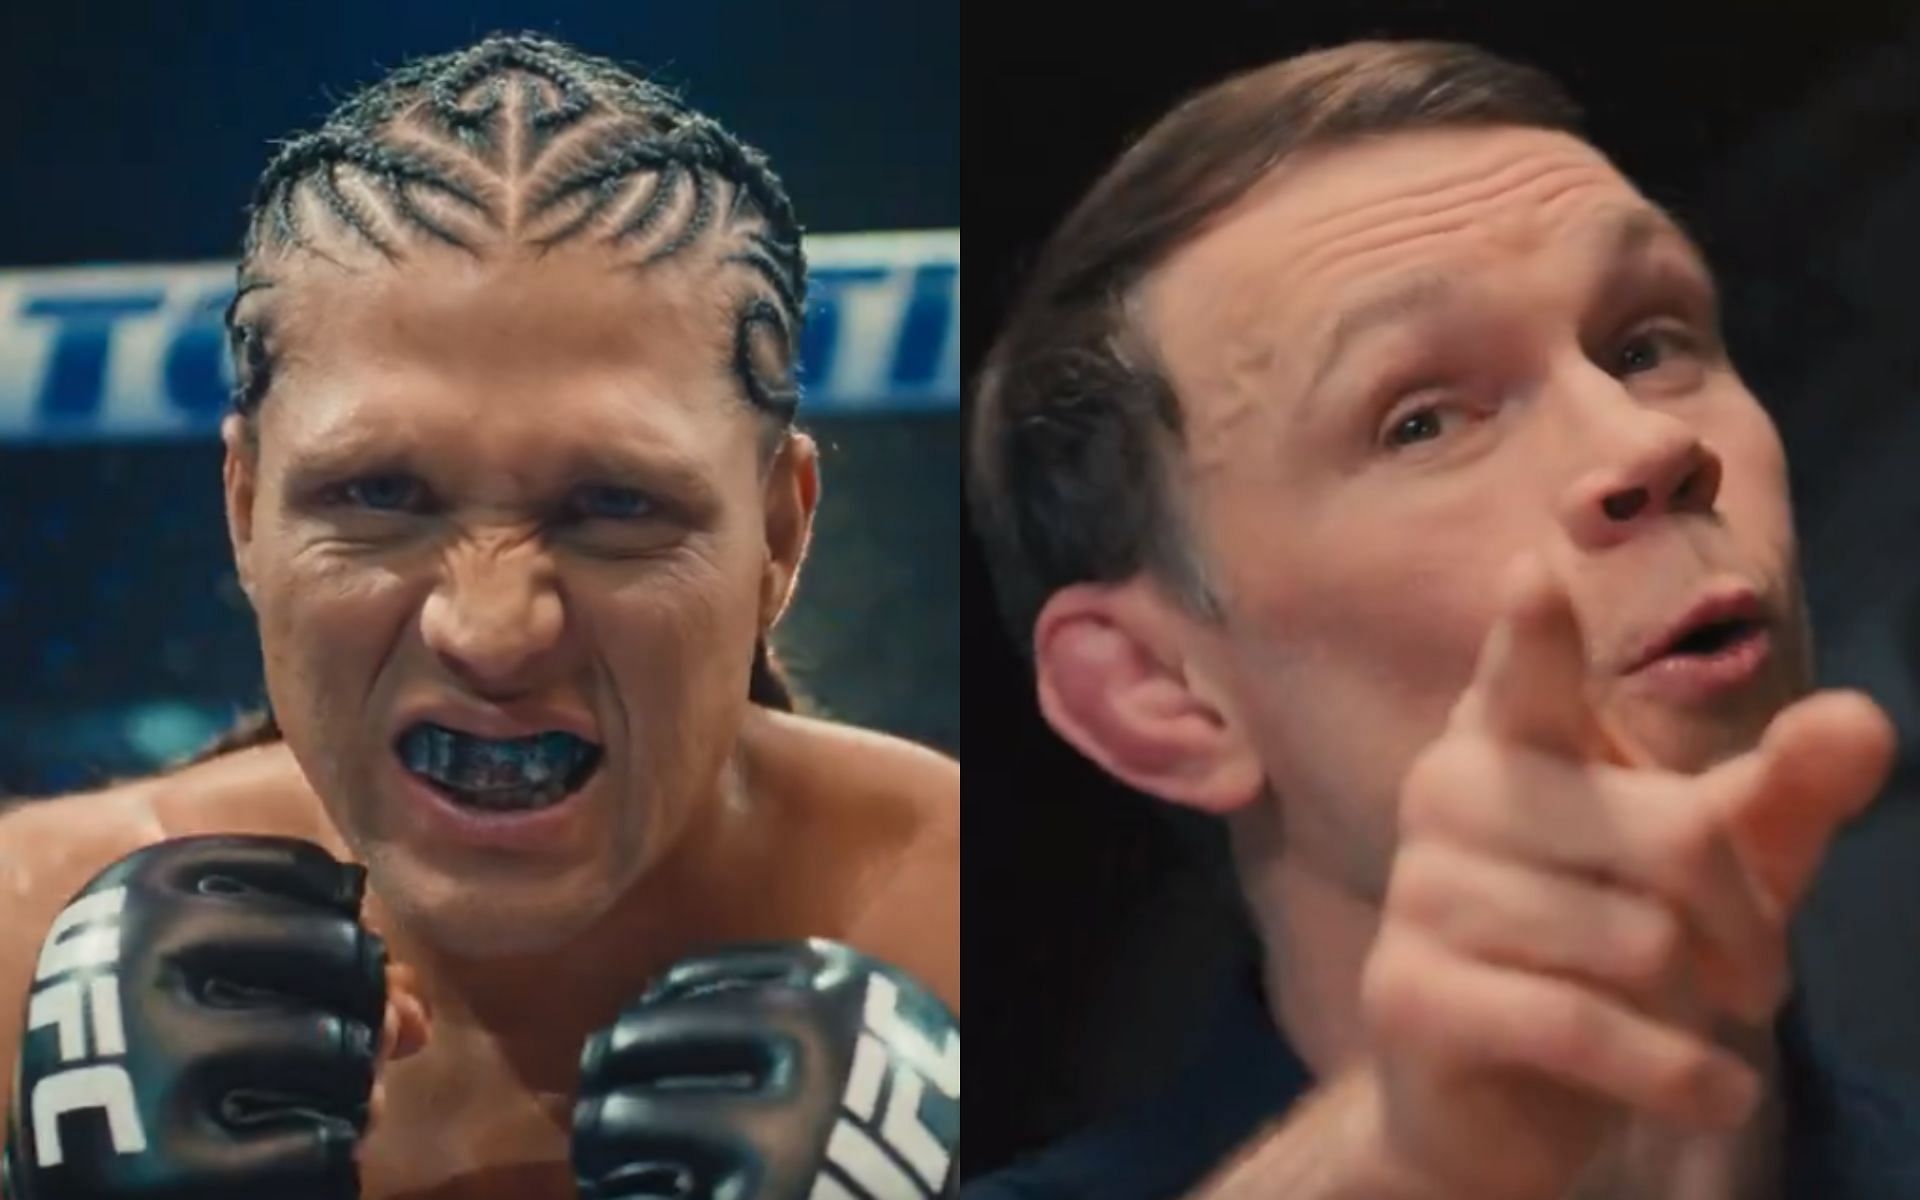 Brian Ortega (left) and Forrest Griffin (right) have garnered praise from MMA fans for their acting skills [Images courtesy: @ufc on X]